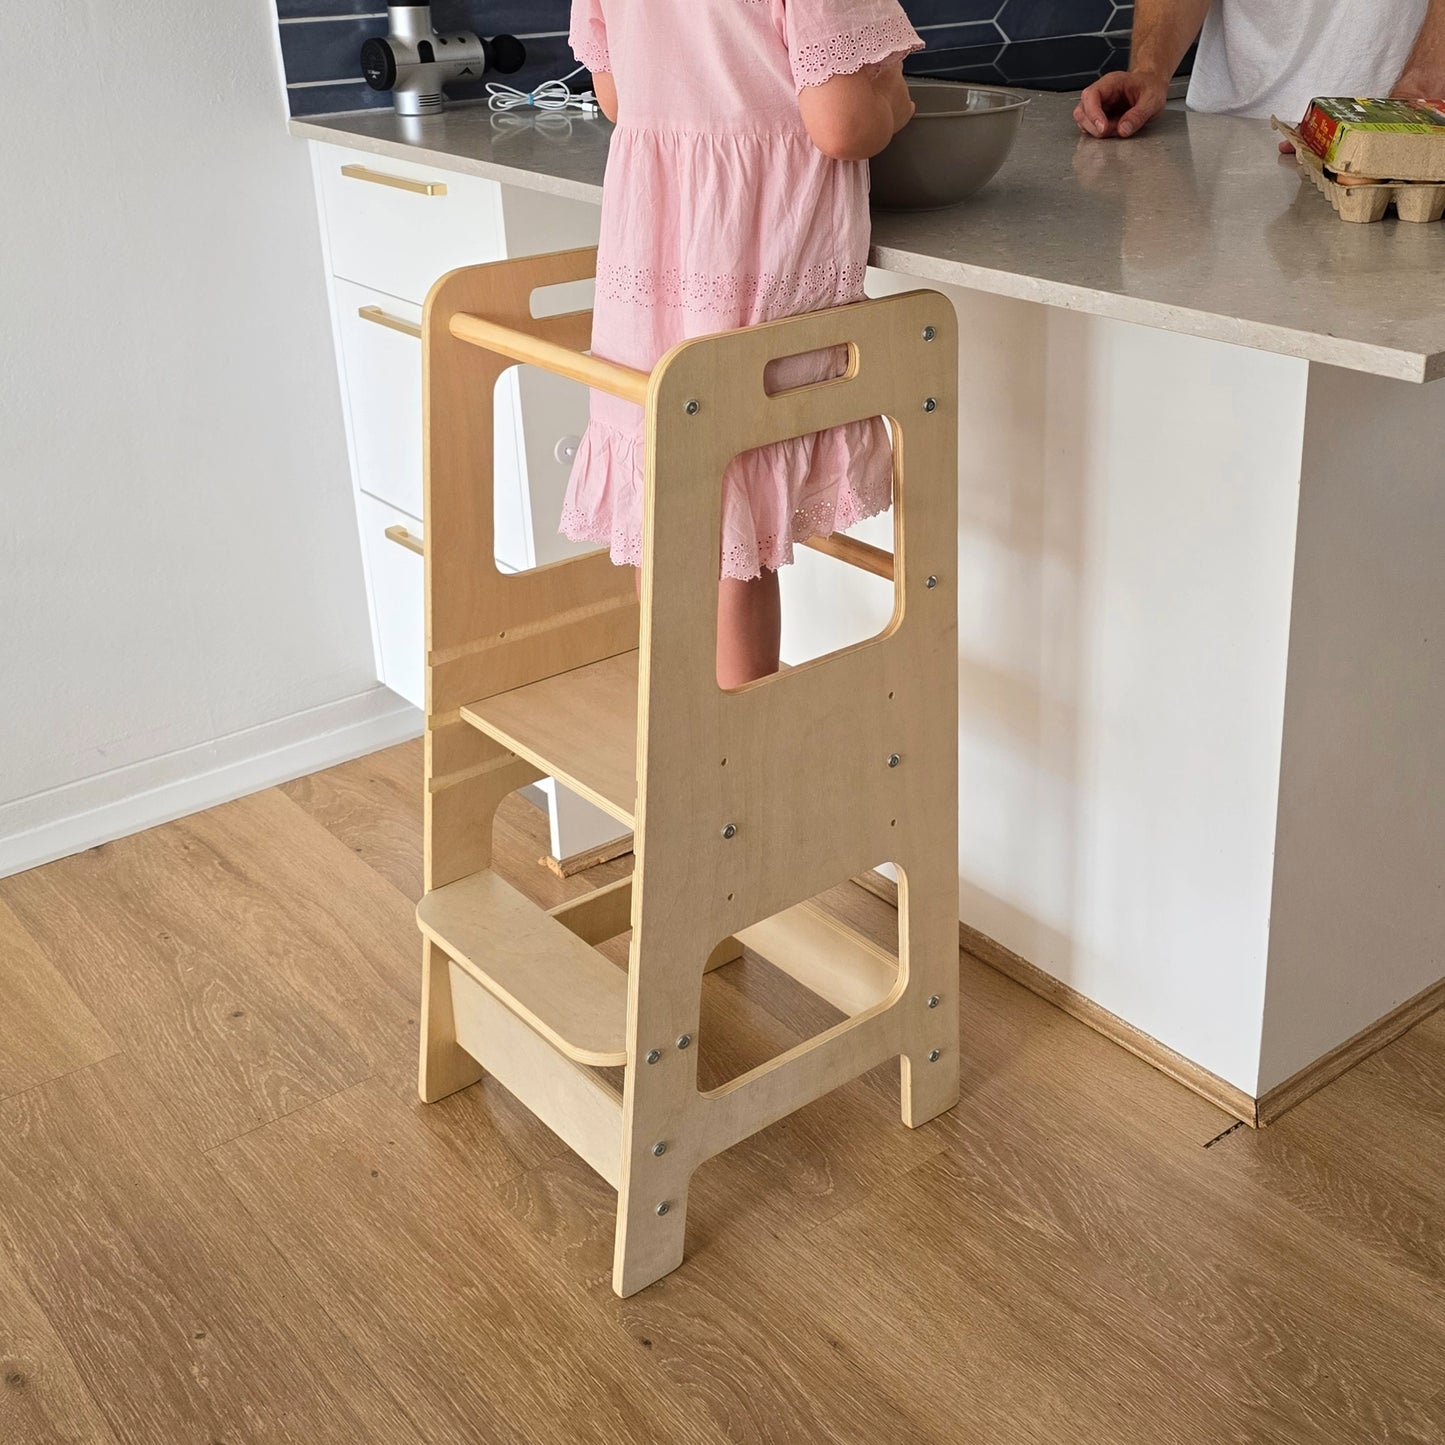 Little girl standing on an Adjustable Learning Tower at a kitchen breakfast bar helping her father in the kitchen.